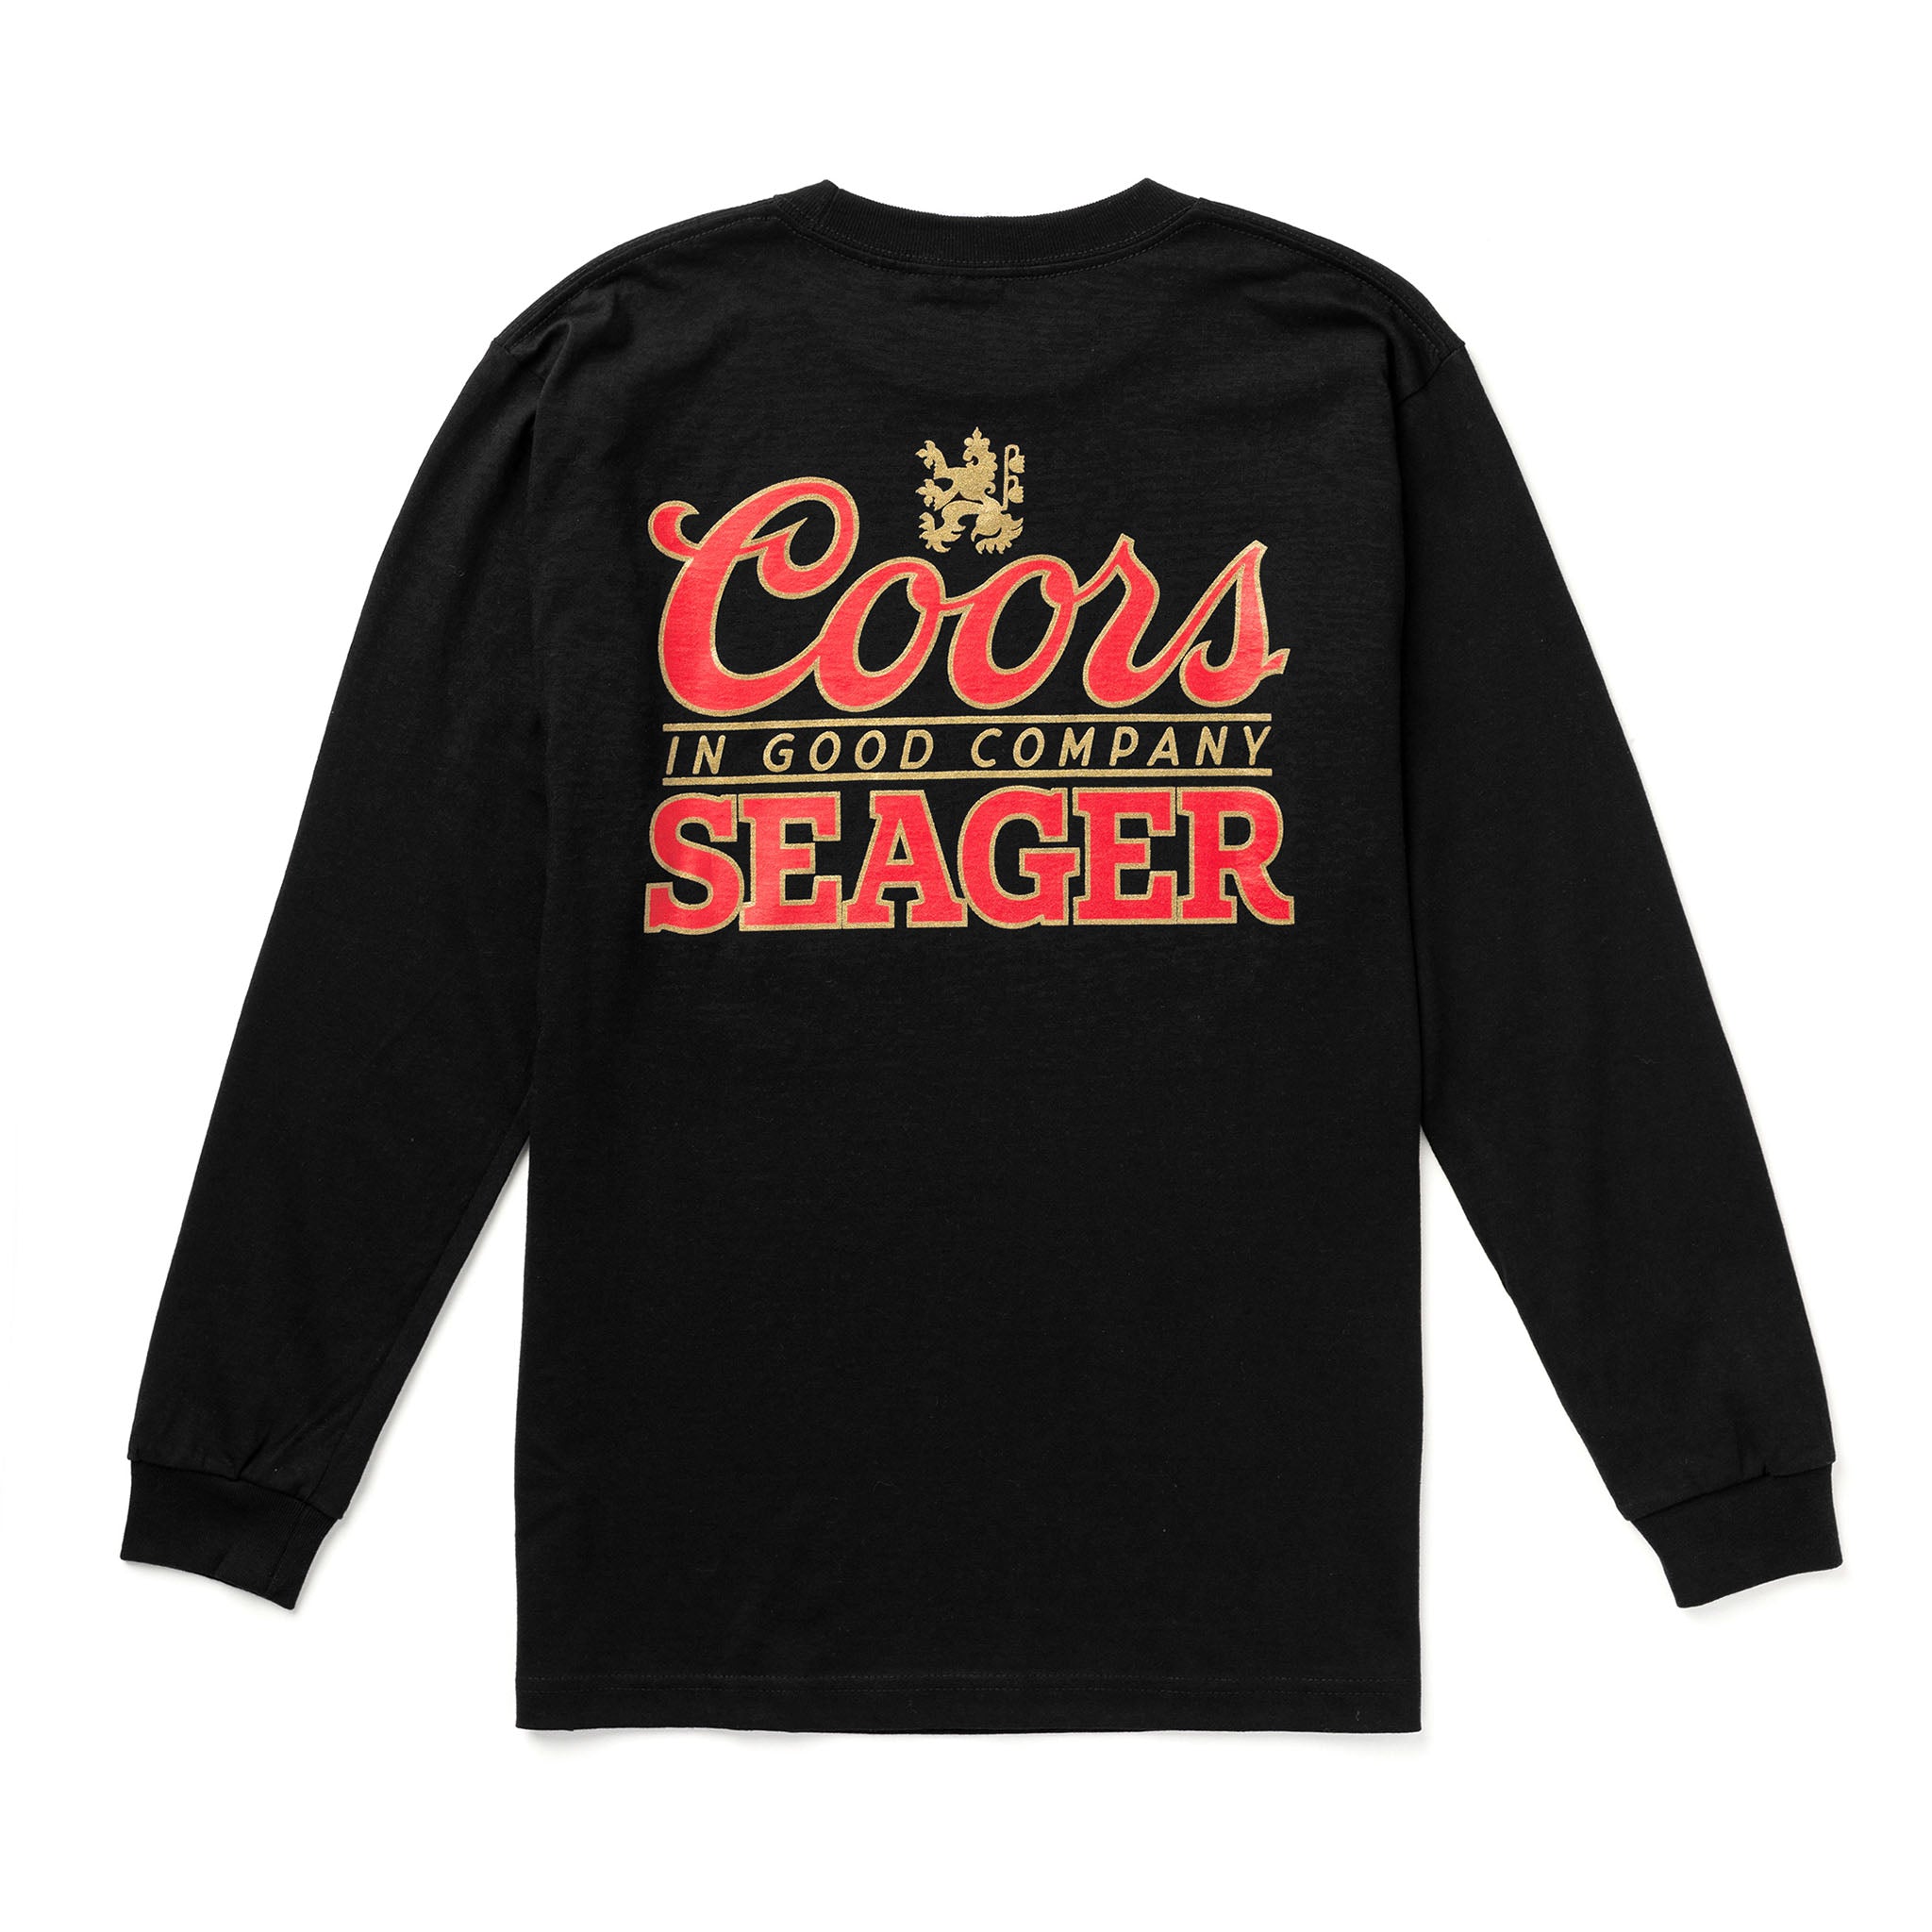 Seager x Coors Banquet Longhorn 4X Hat Stone